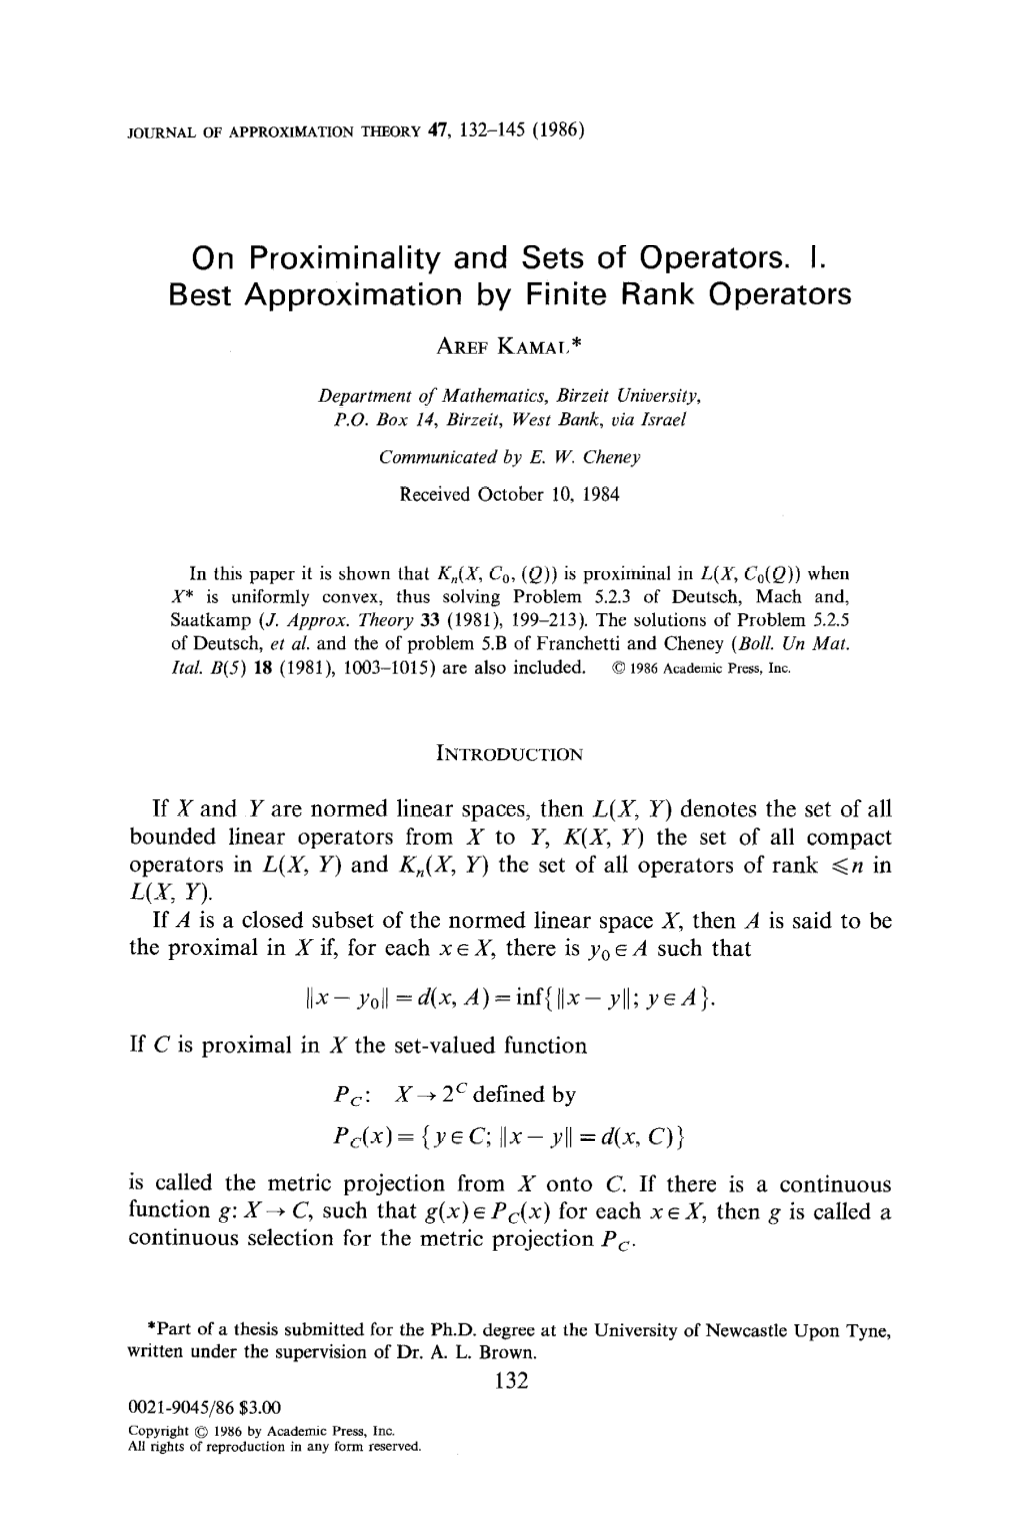 On Proximinality and Sets of Operators. I. Best Approximation by Finite Rank Operators